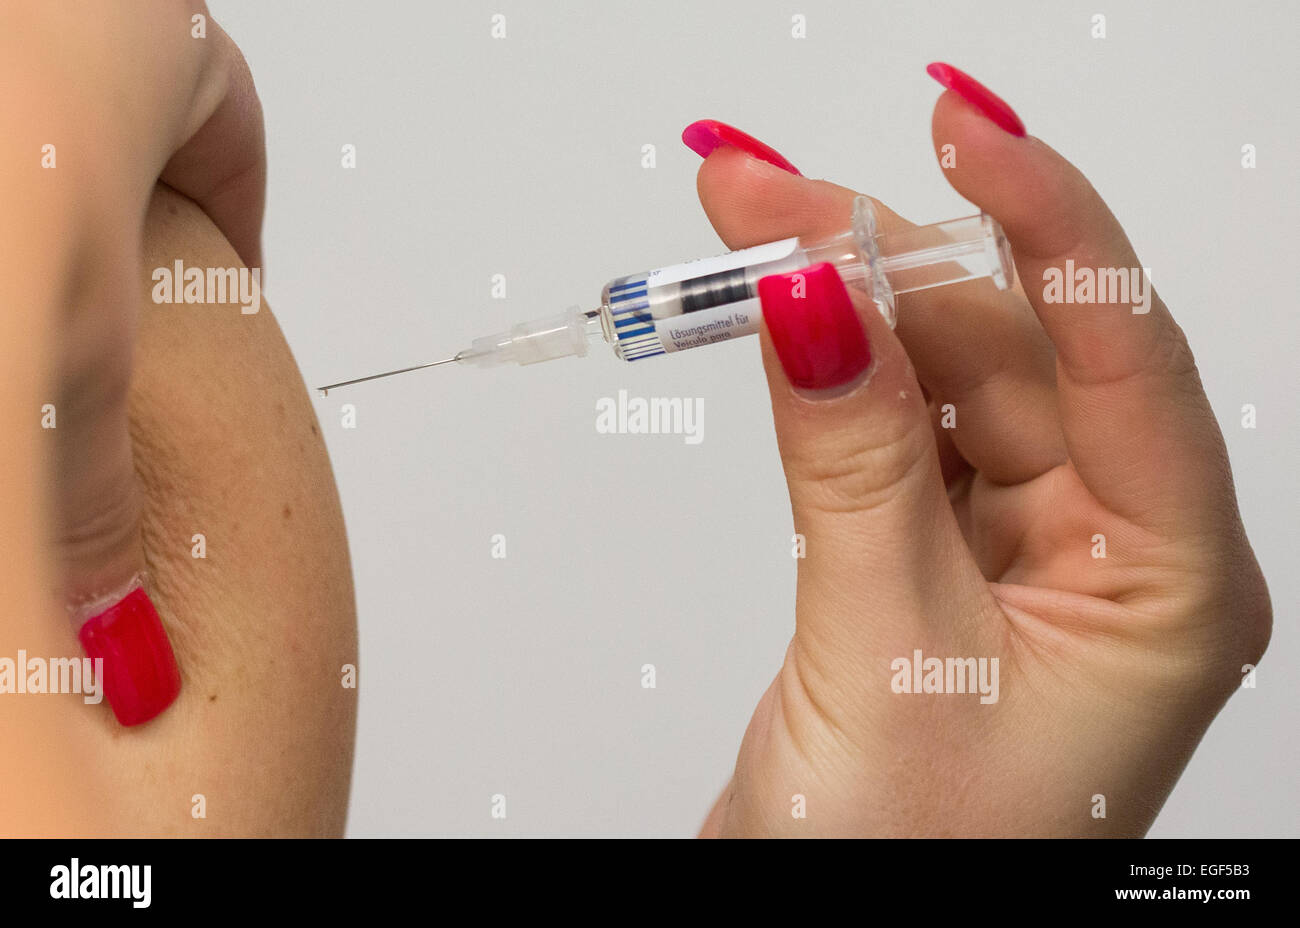 Berlin, Germany. 24th Feb, 2015. A man is vaccinated with a measles shot by a doctor's assistant wearing red nail polish in Berlin, Germany, 24 February 2015. PHOTO: LUKAS SCHULZE/dpa/Alamy Live News Stock Photo